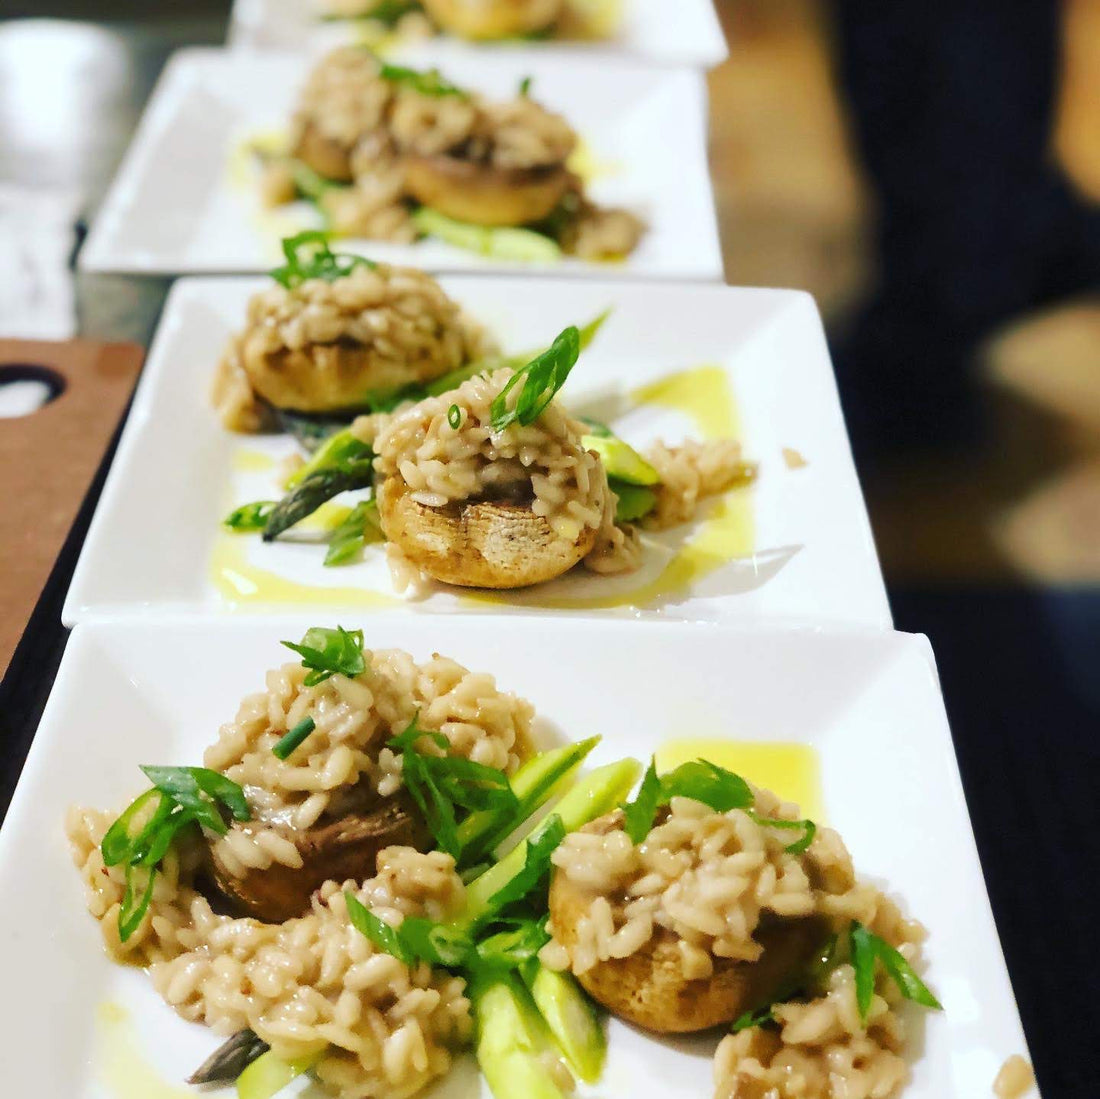 Risotto Stuffed Mushrooms with Asparagus Slaw